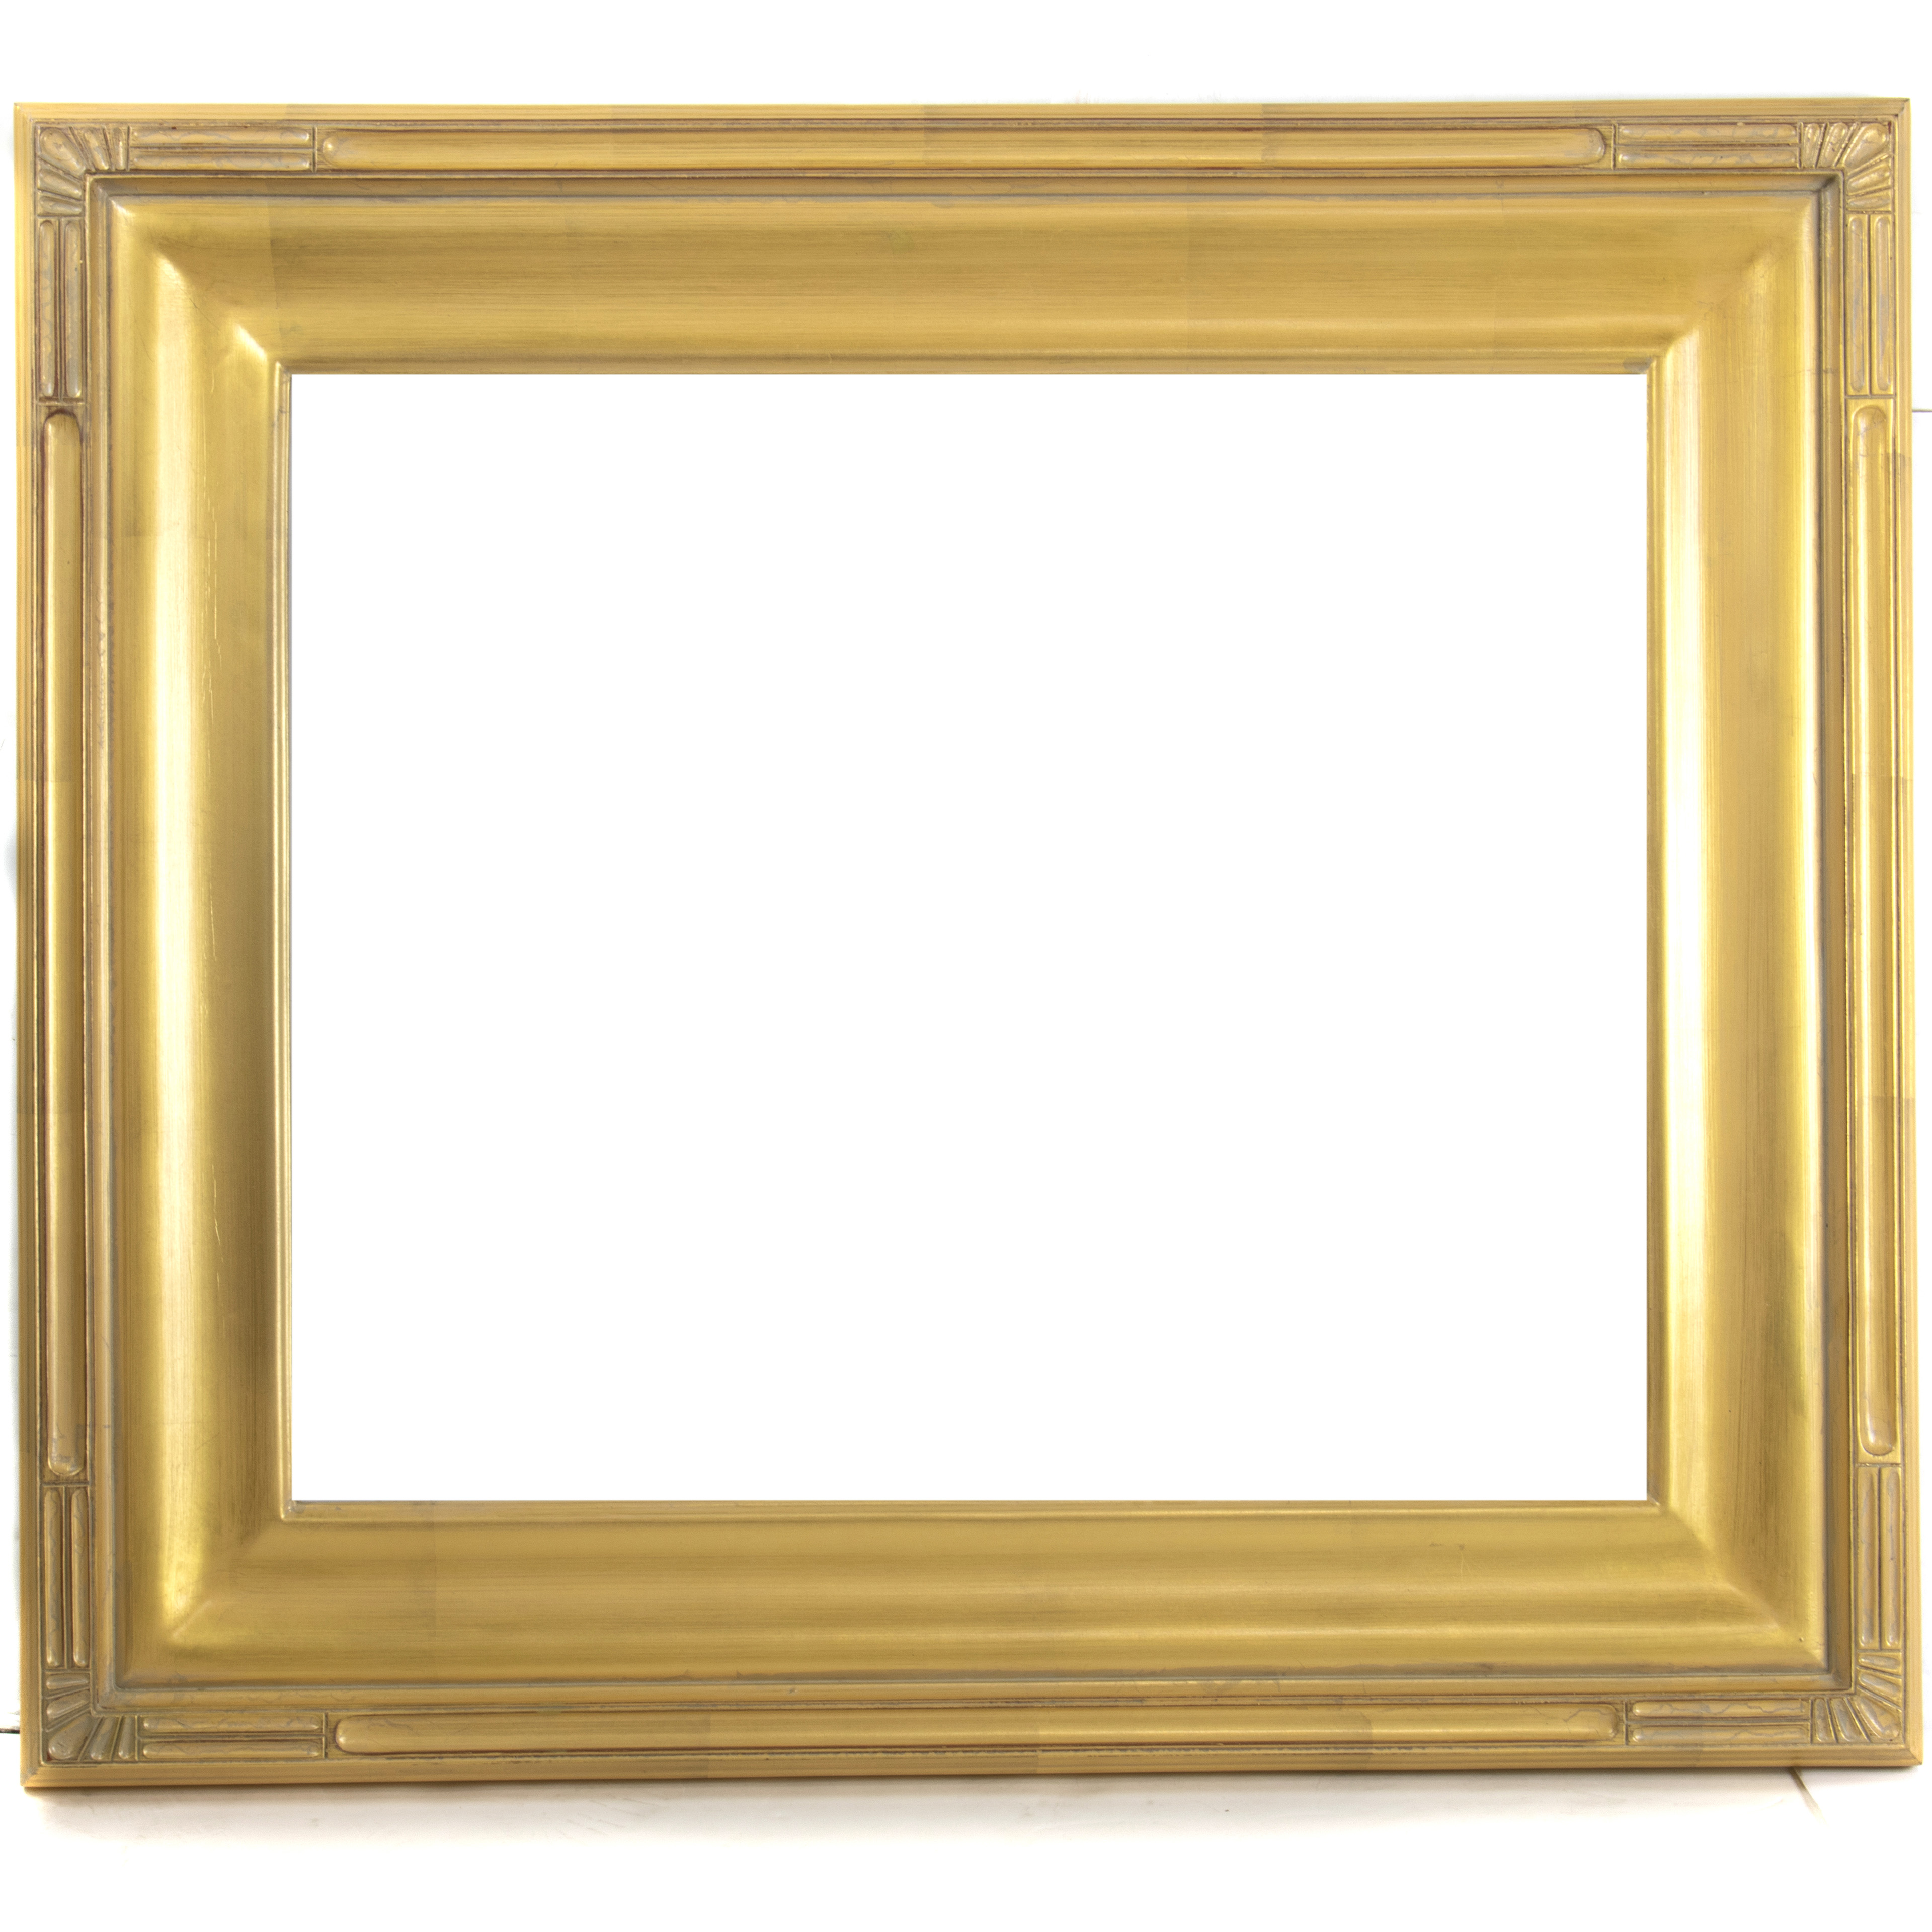 ARTS AND CRAFTS STYLE FRAME Arts 3a5c8b